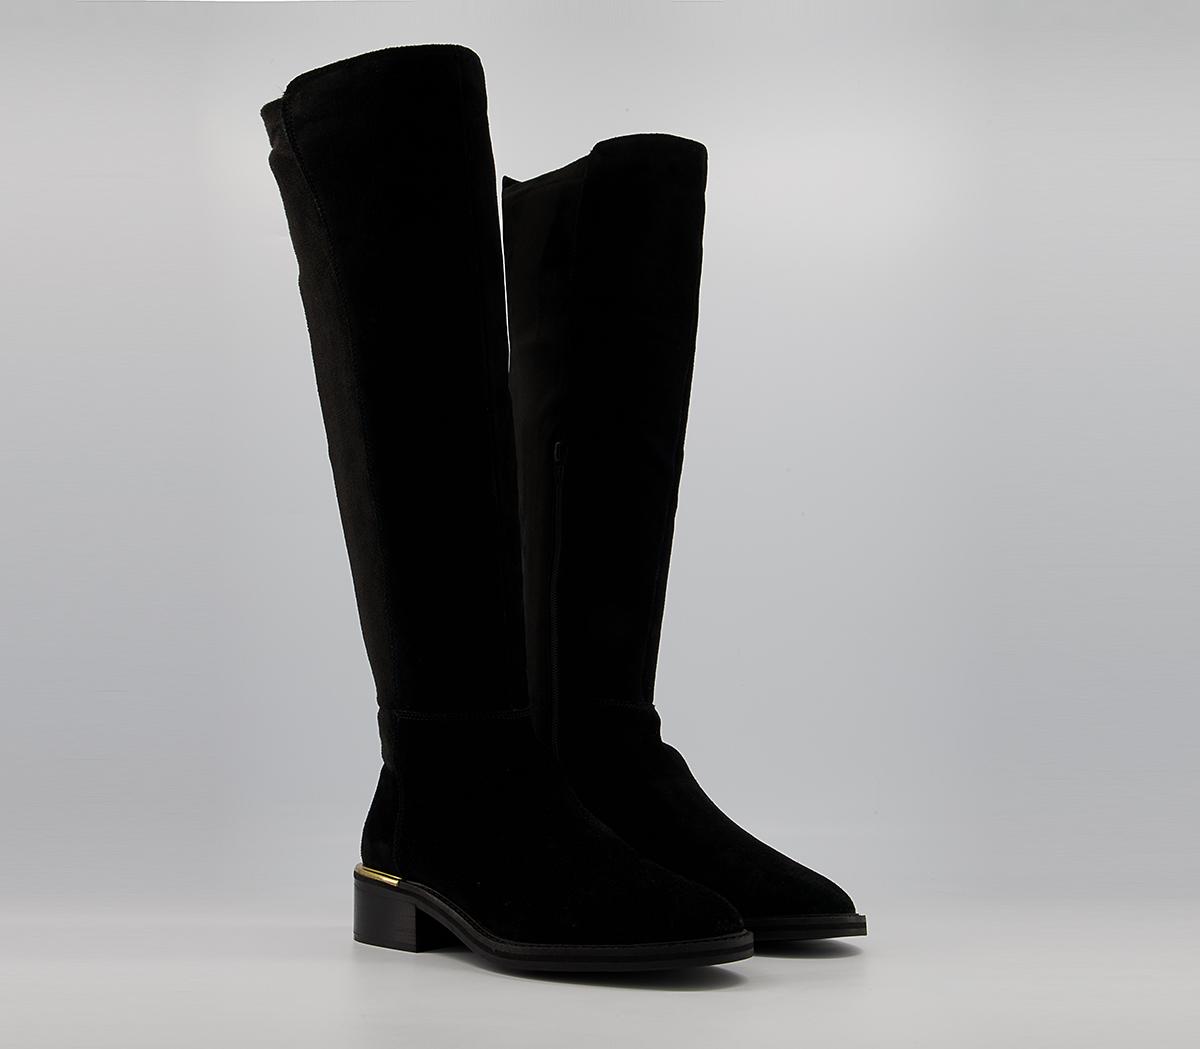 OFFICE Knee Boots Black Suede Knee High Boots